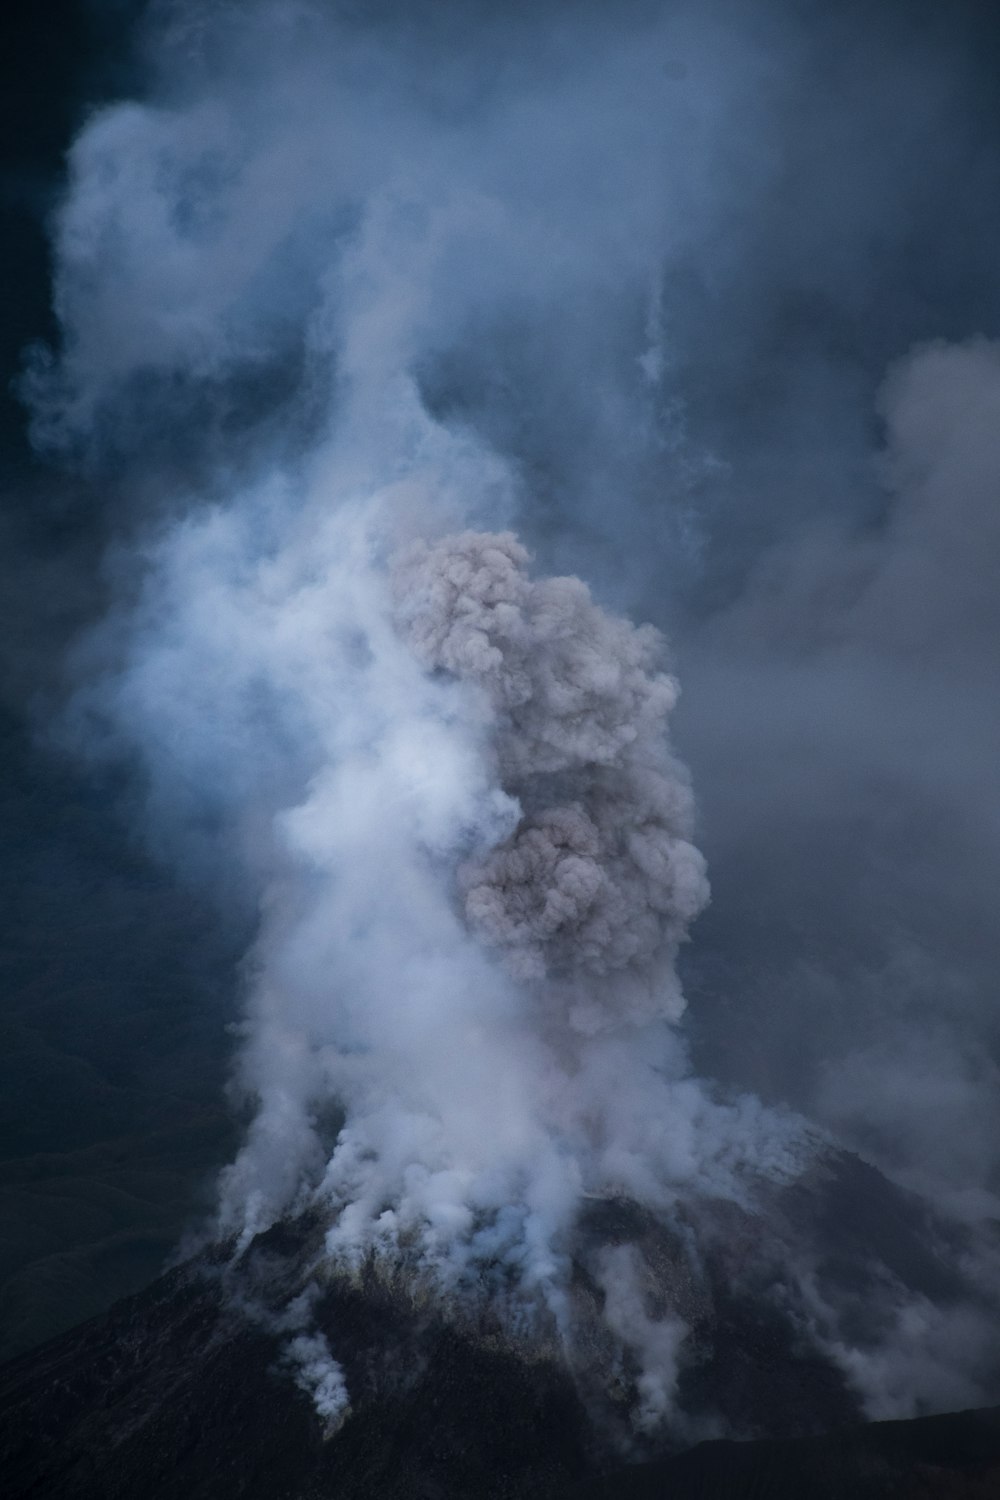 a large plume of smoke billows from the top of a mountain